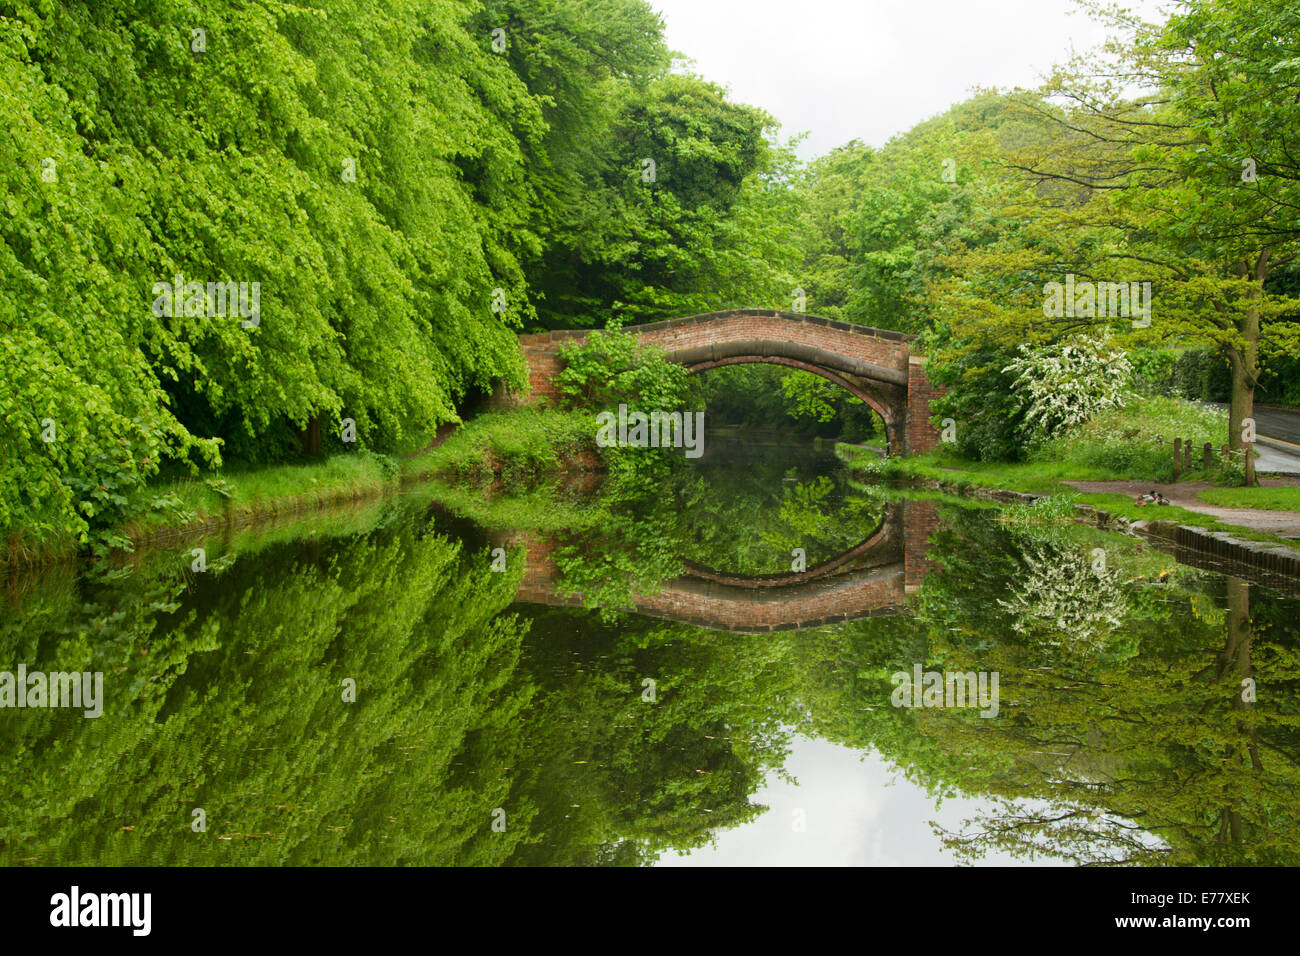 English woodlands and historic arched red brick bridge over Llangollen canal reflected in mirror surface of calm water Stock Photo